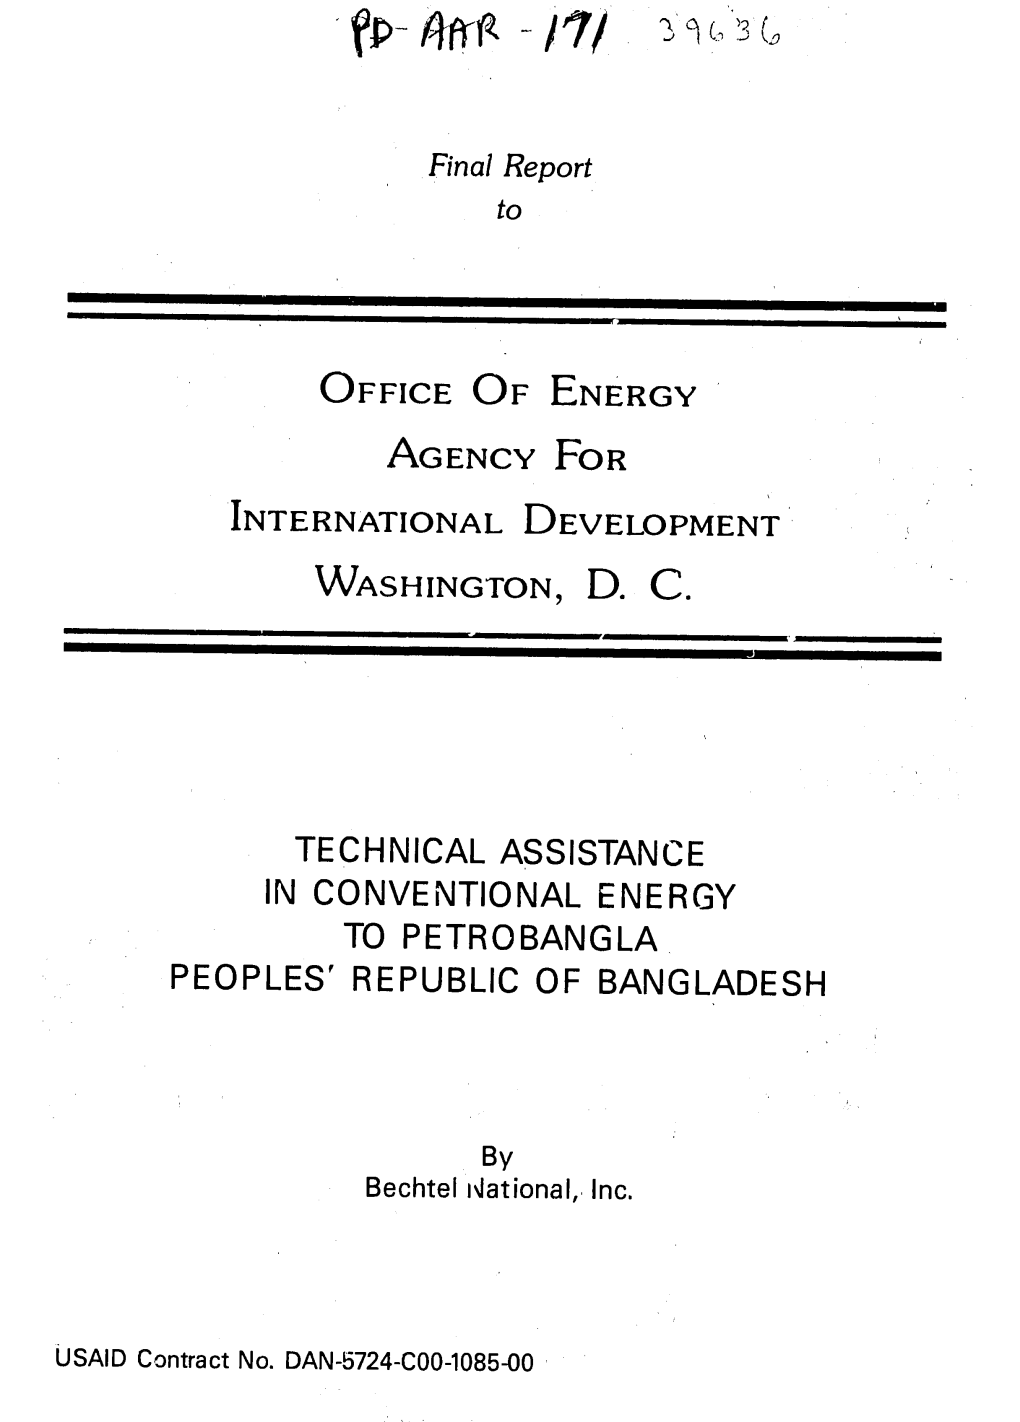 Technical Assistance in Conventional Energy to Petrobangla Peoples' Republic of Bangladesh